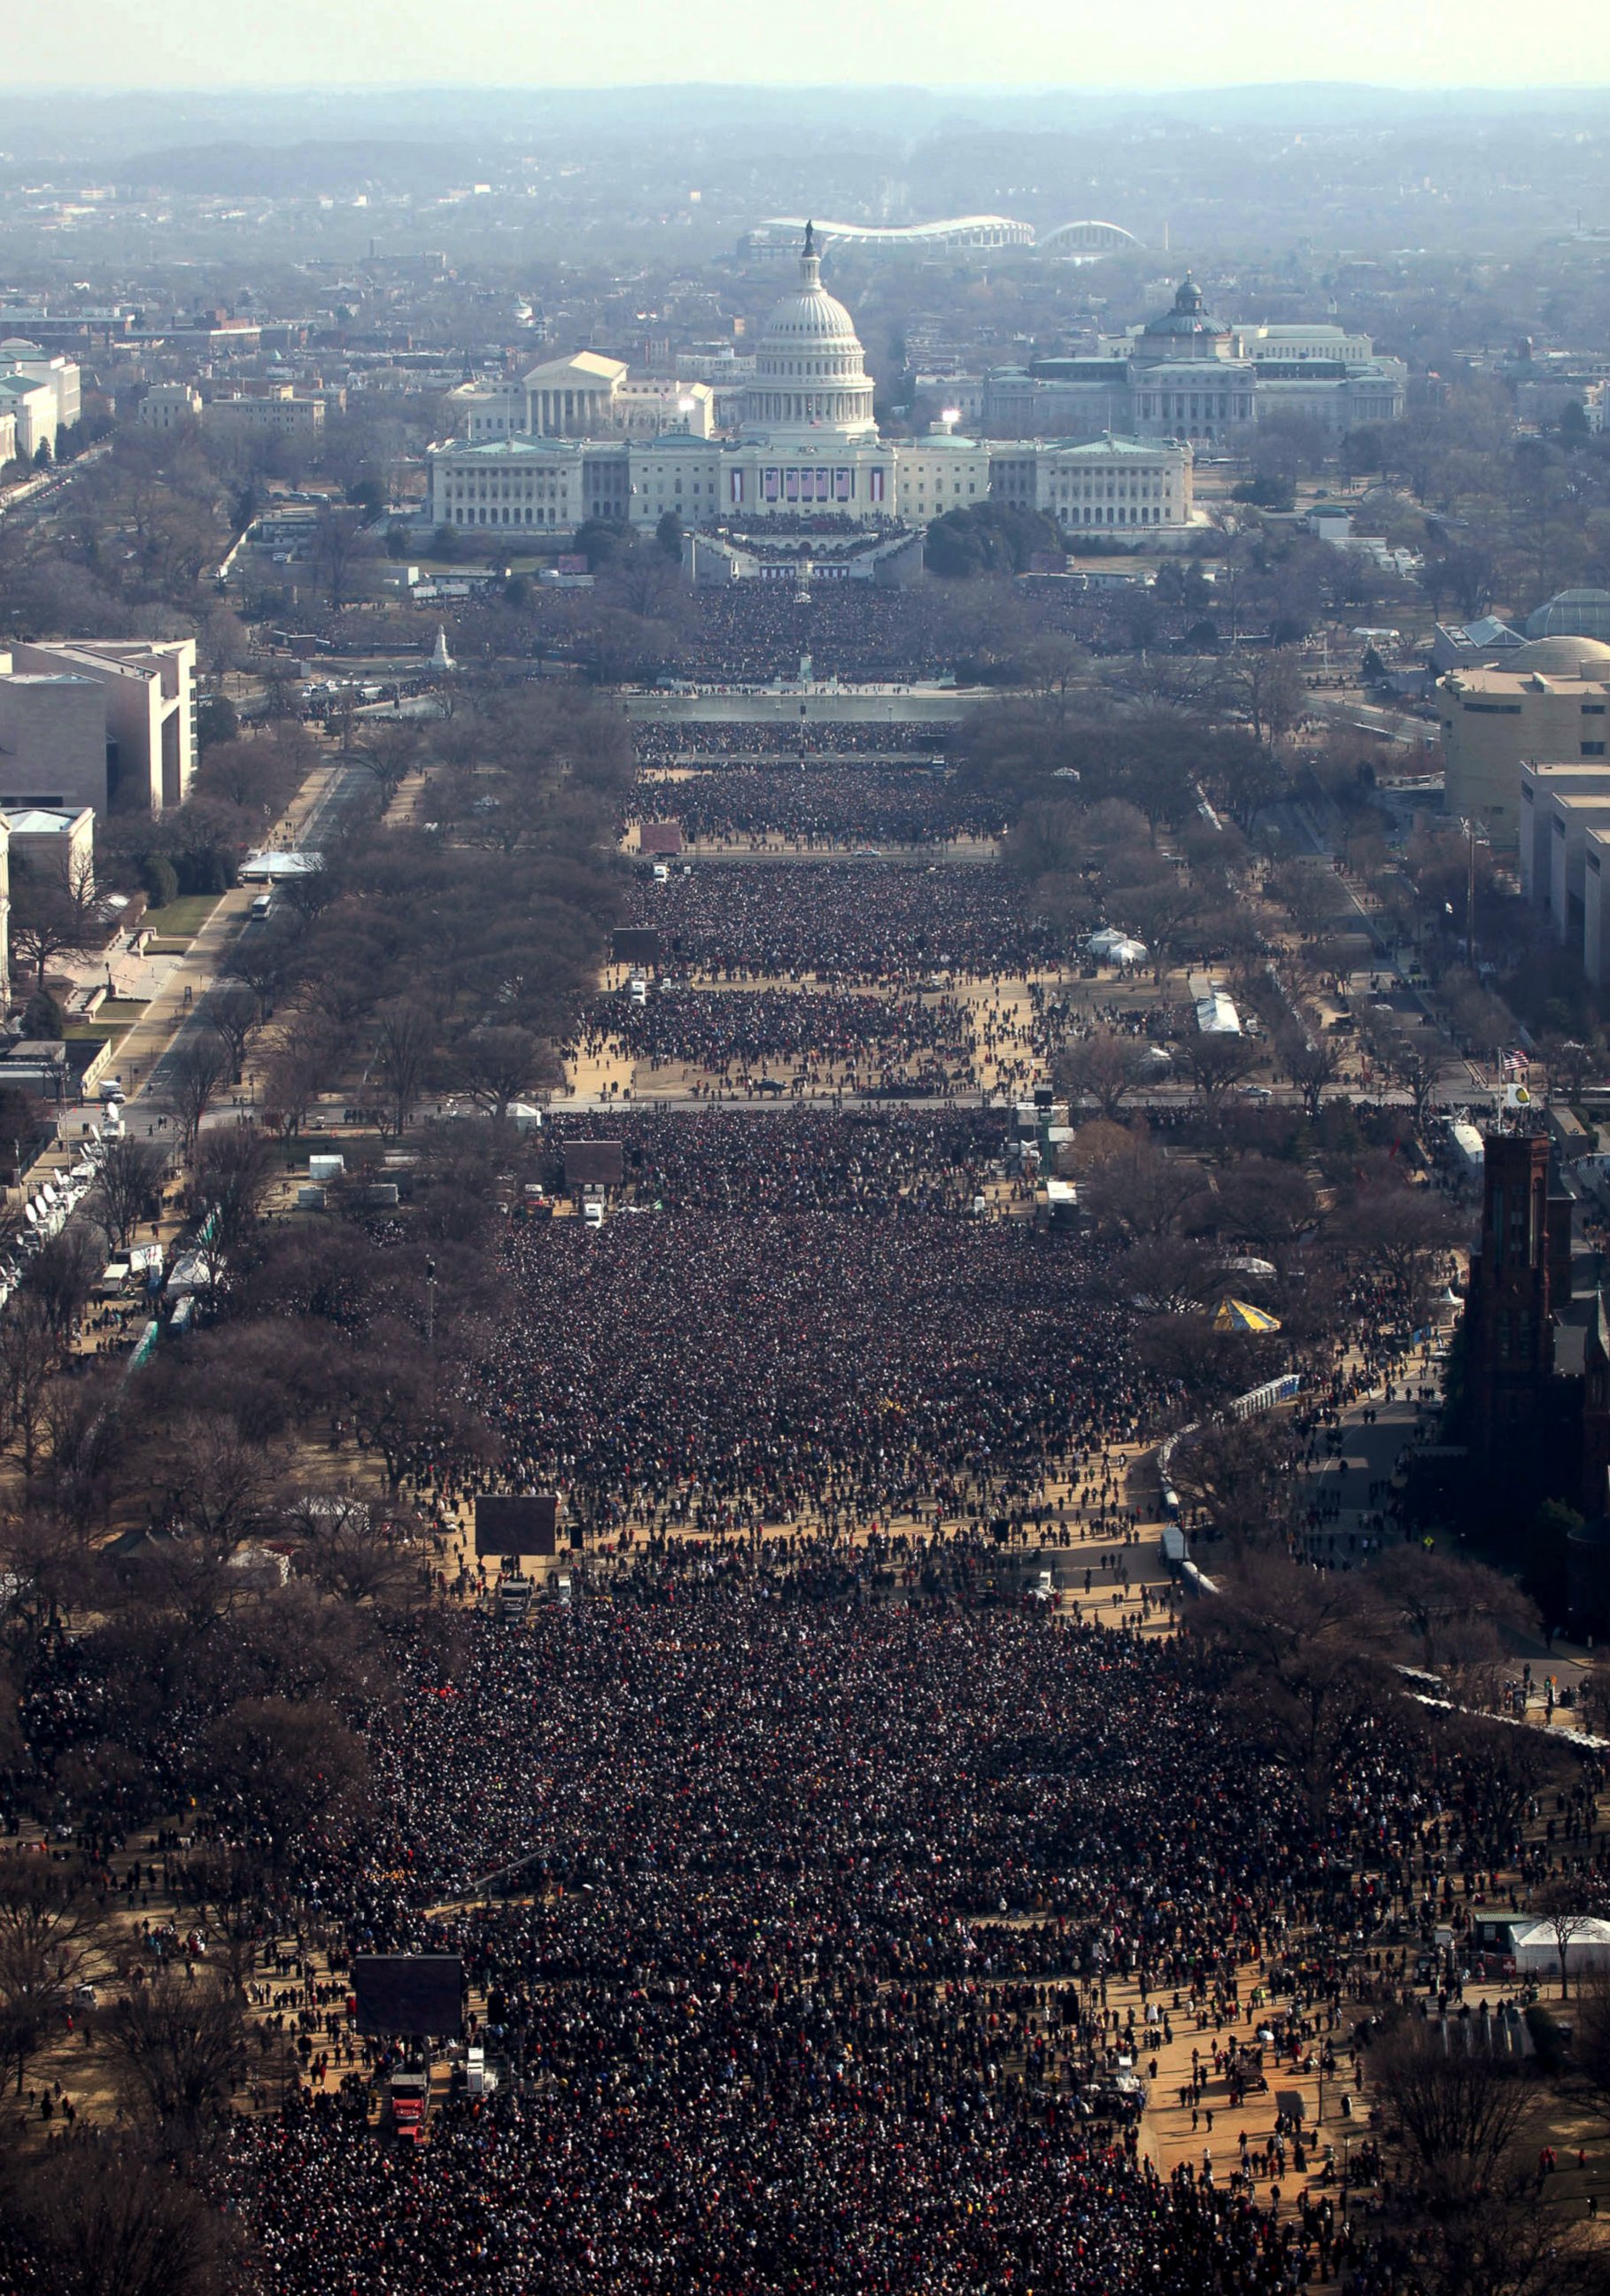 PHOTO: Thousands gather at the Washington Monument for the inauguration of President Barack Obama as 44th U.S. President in Washington D.C. Jan. 20, 2009. Picture taken at approximately 11AM.